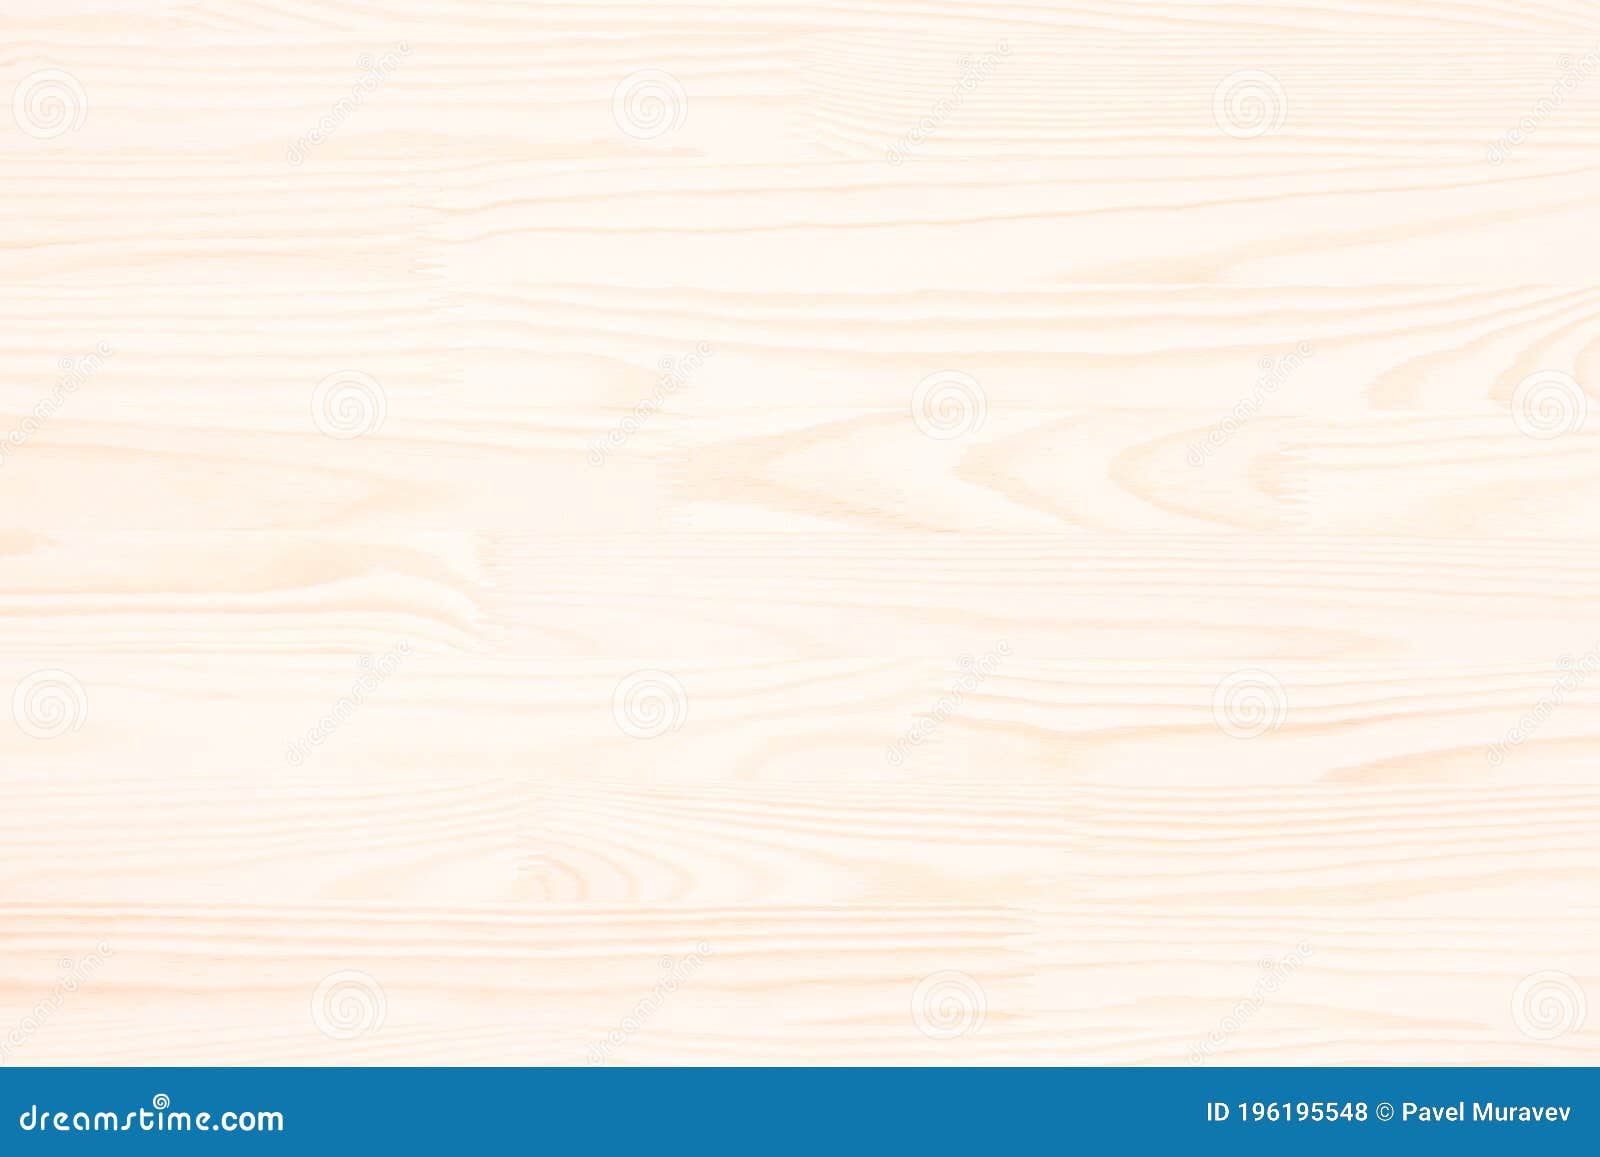 Light Wooden Background. Wood Texture with Natural Pattern Stock ...